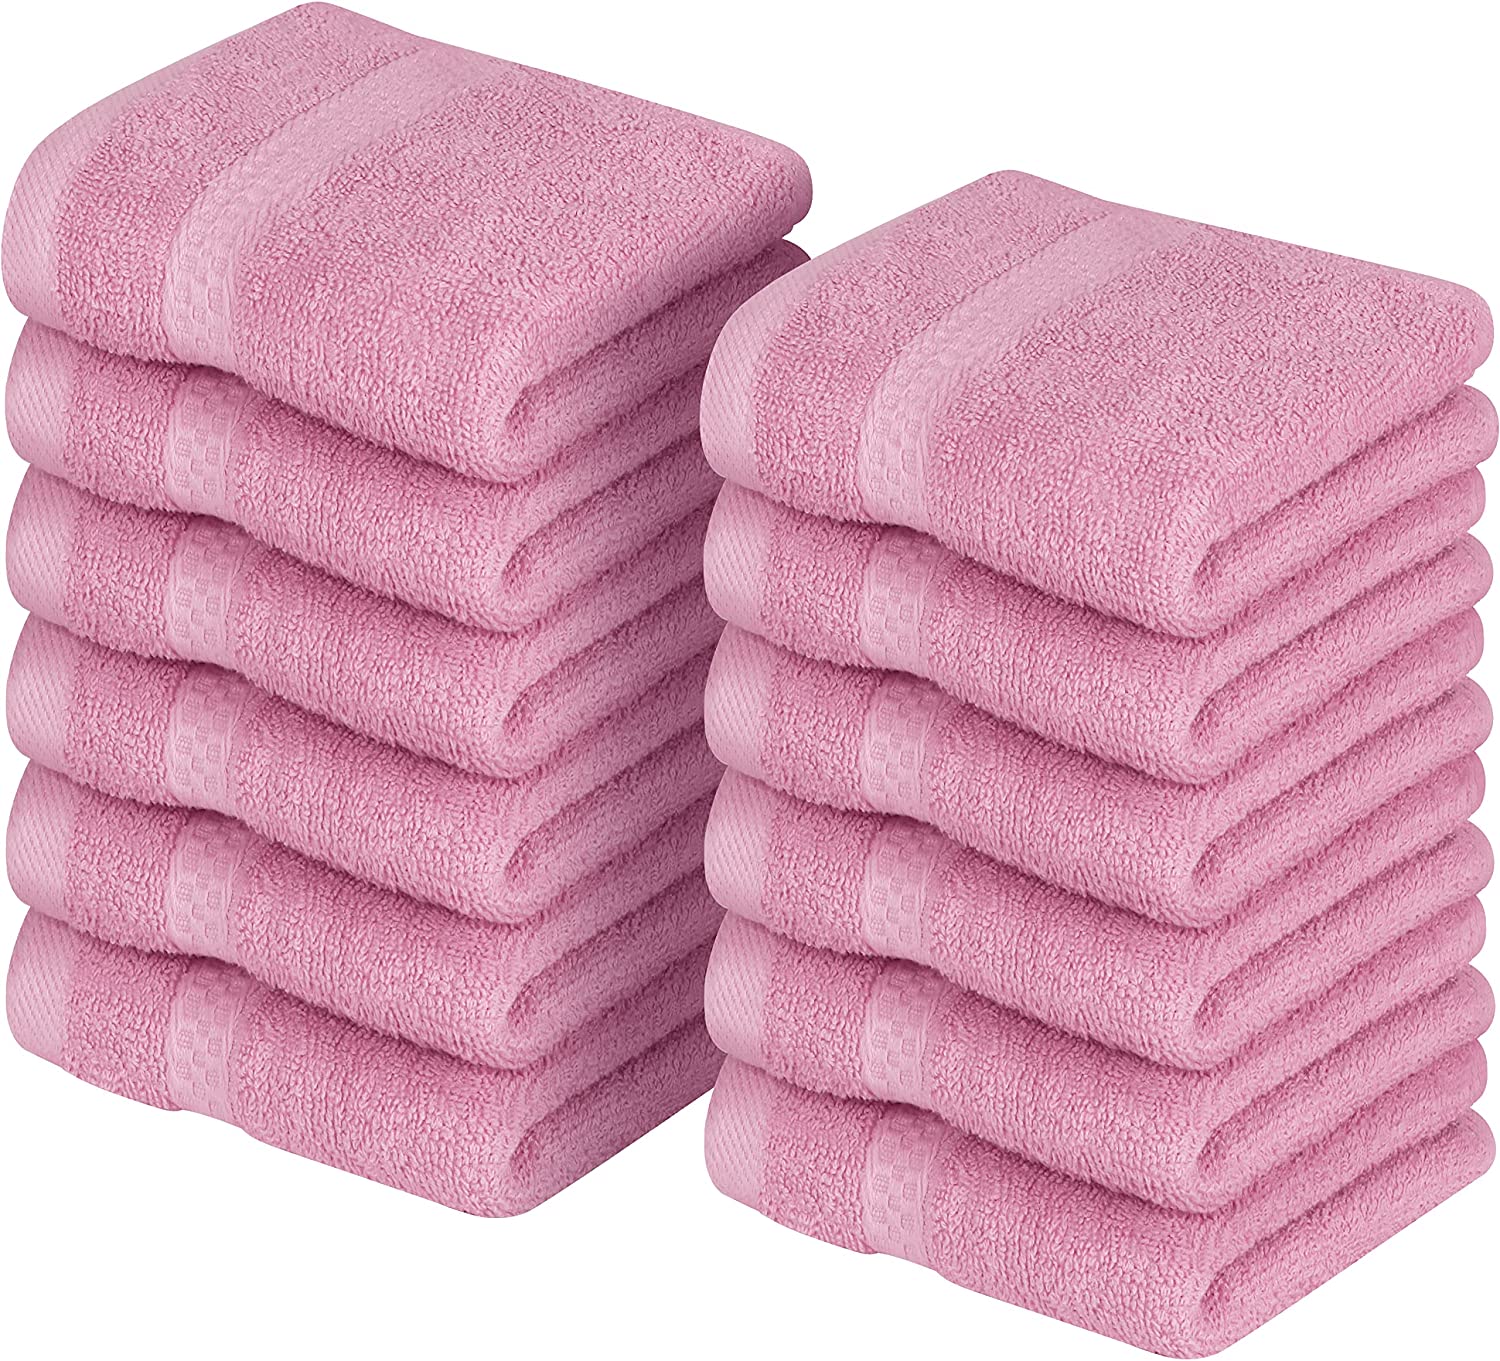 Utopia Towels Pink Towel Set 8-Piece - Viscose Stripe Towels - 600 GSM Ring  Spun Cotton - Highly Absorbent Towels (Pack of 8) 